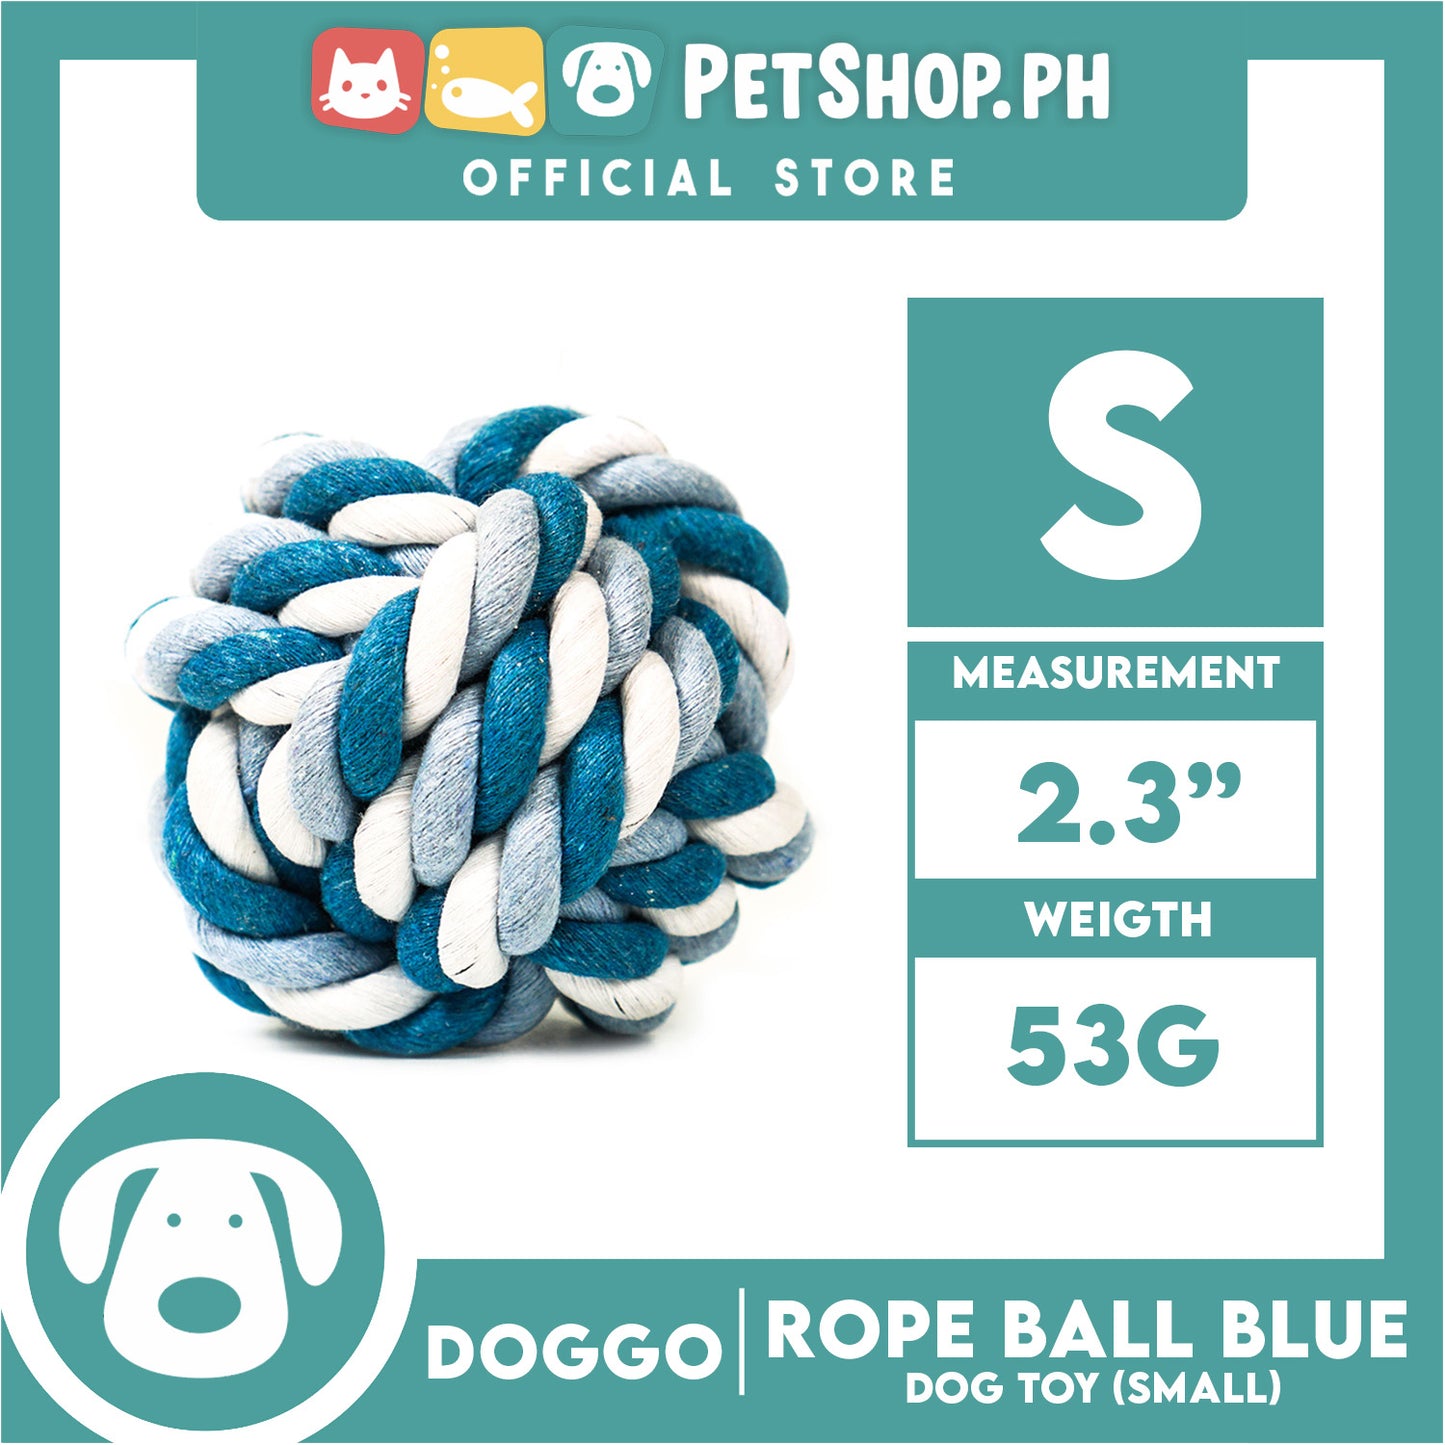 Doggo Rope Ball Small Size (Blue) Perfect Toy for Dog